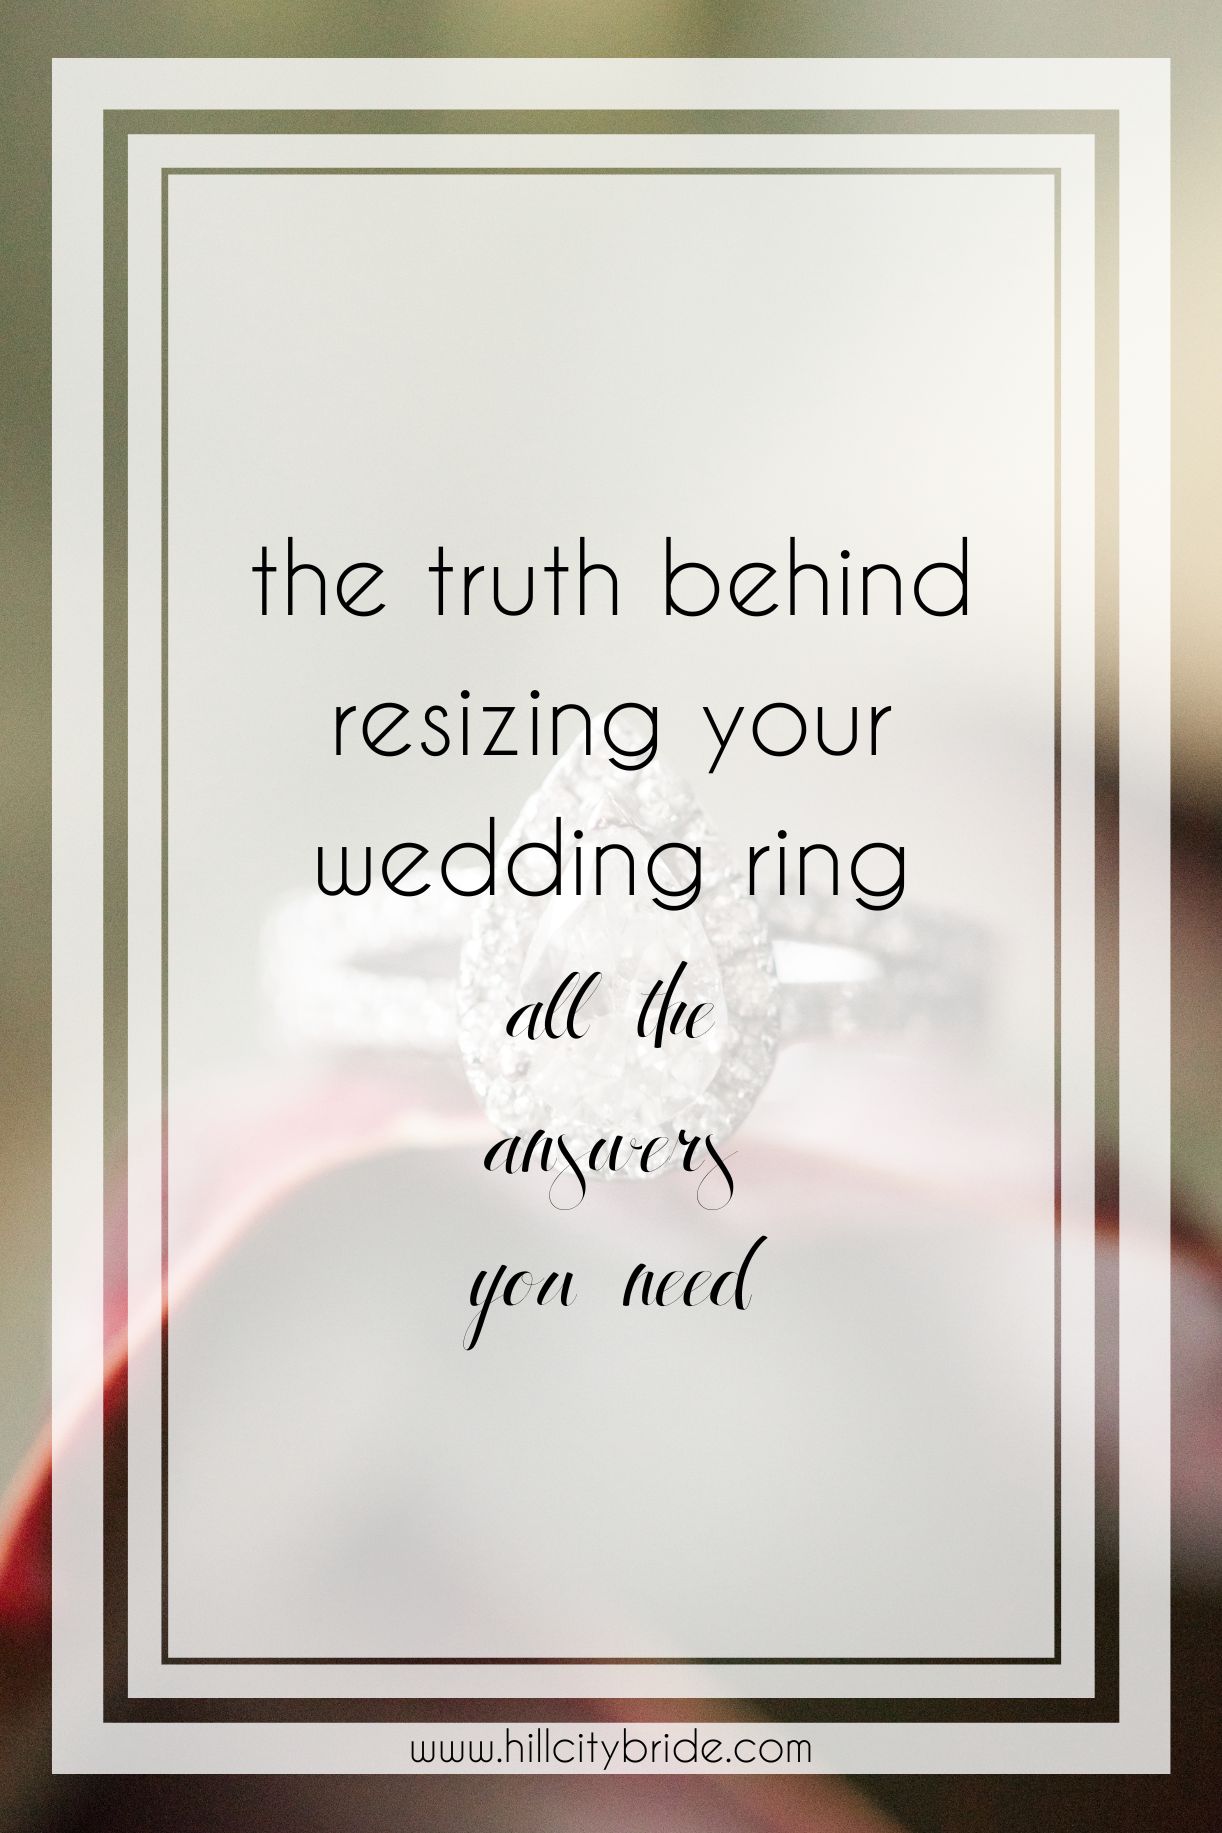 Can Wedding Rings Be Resized After the Big Day?